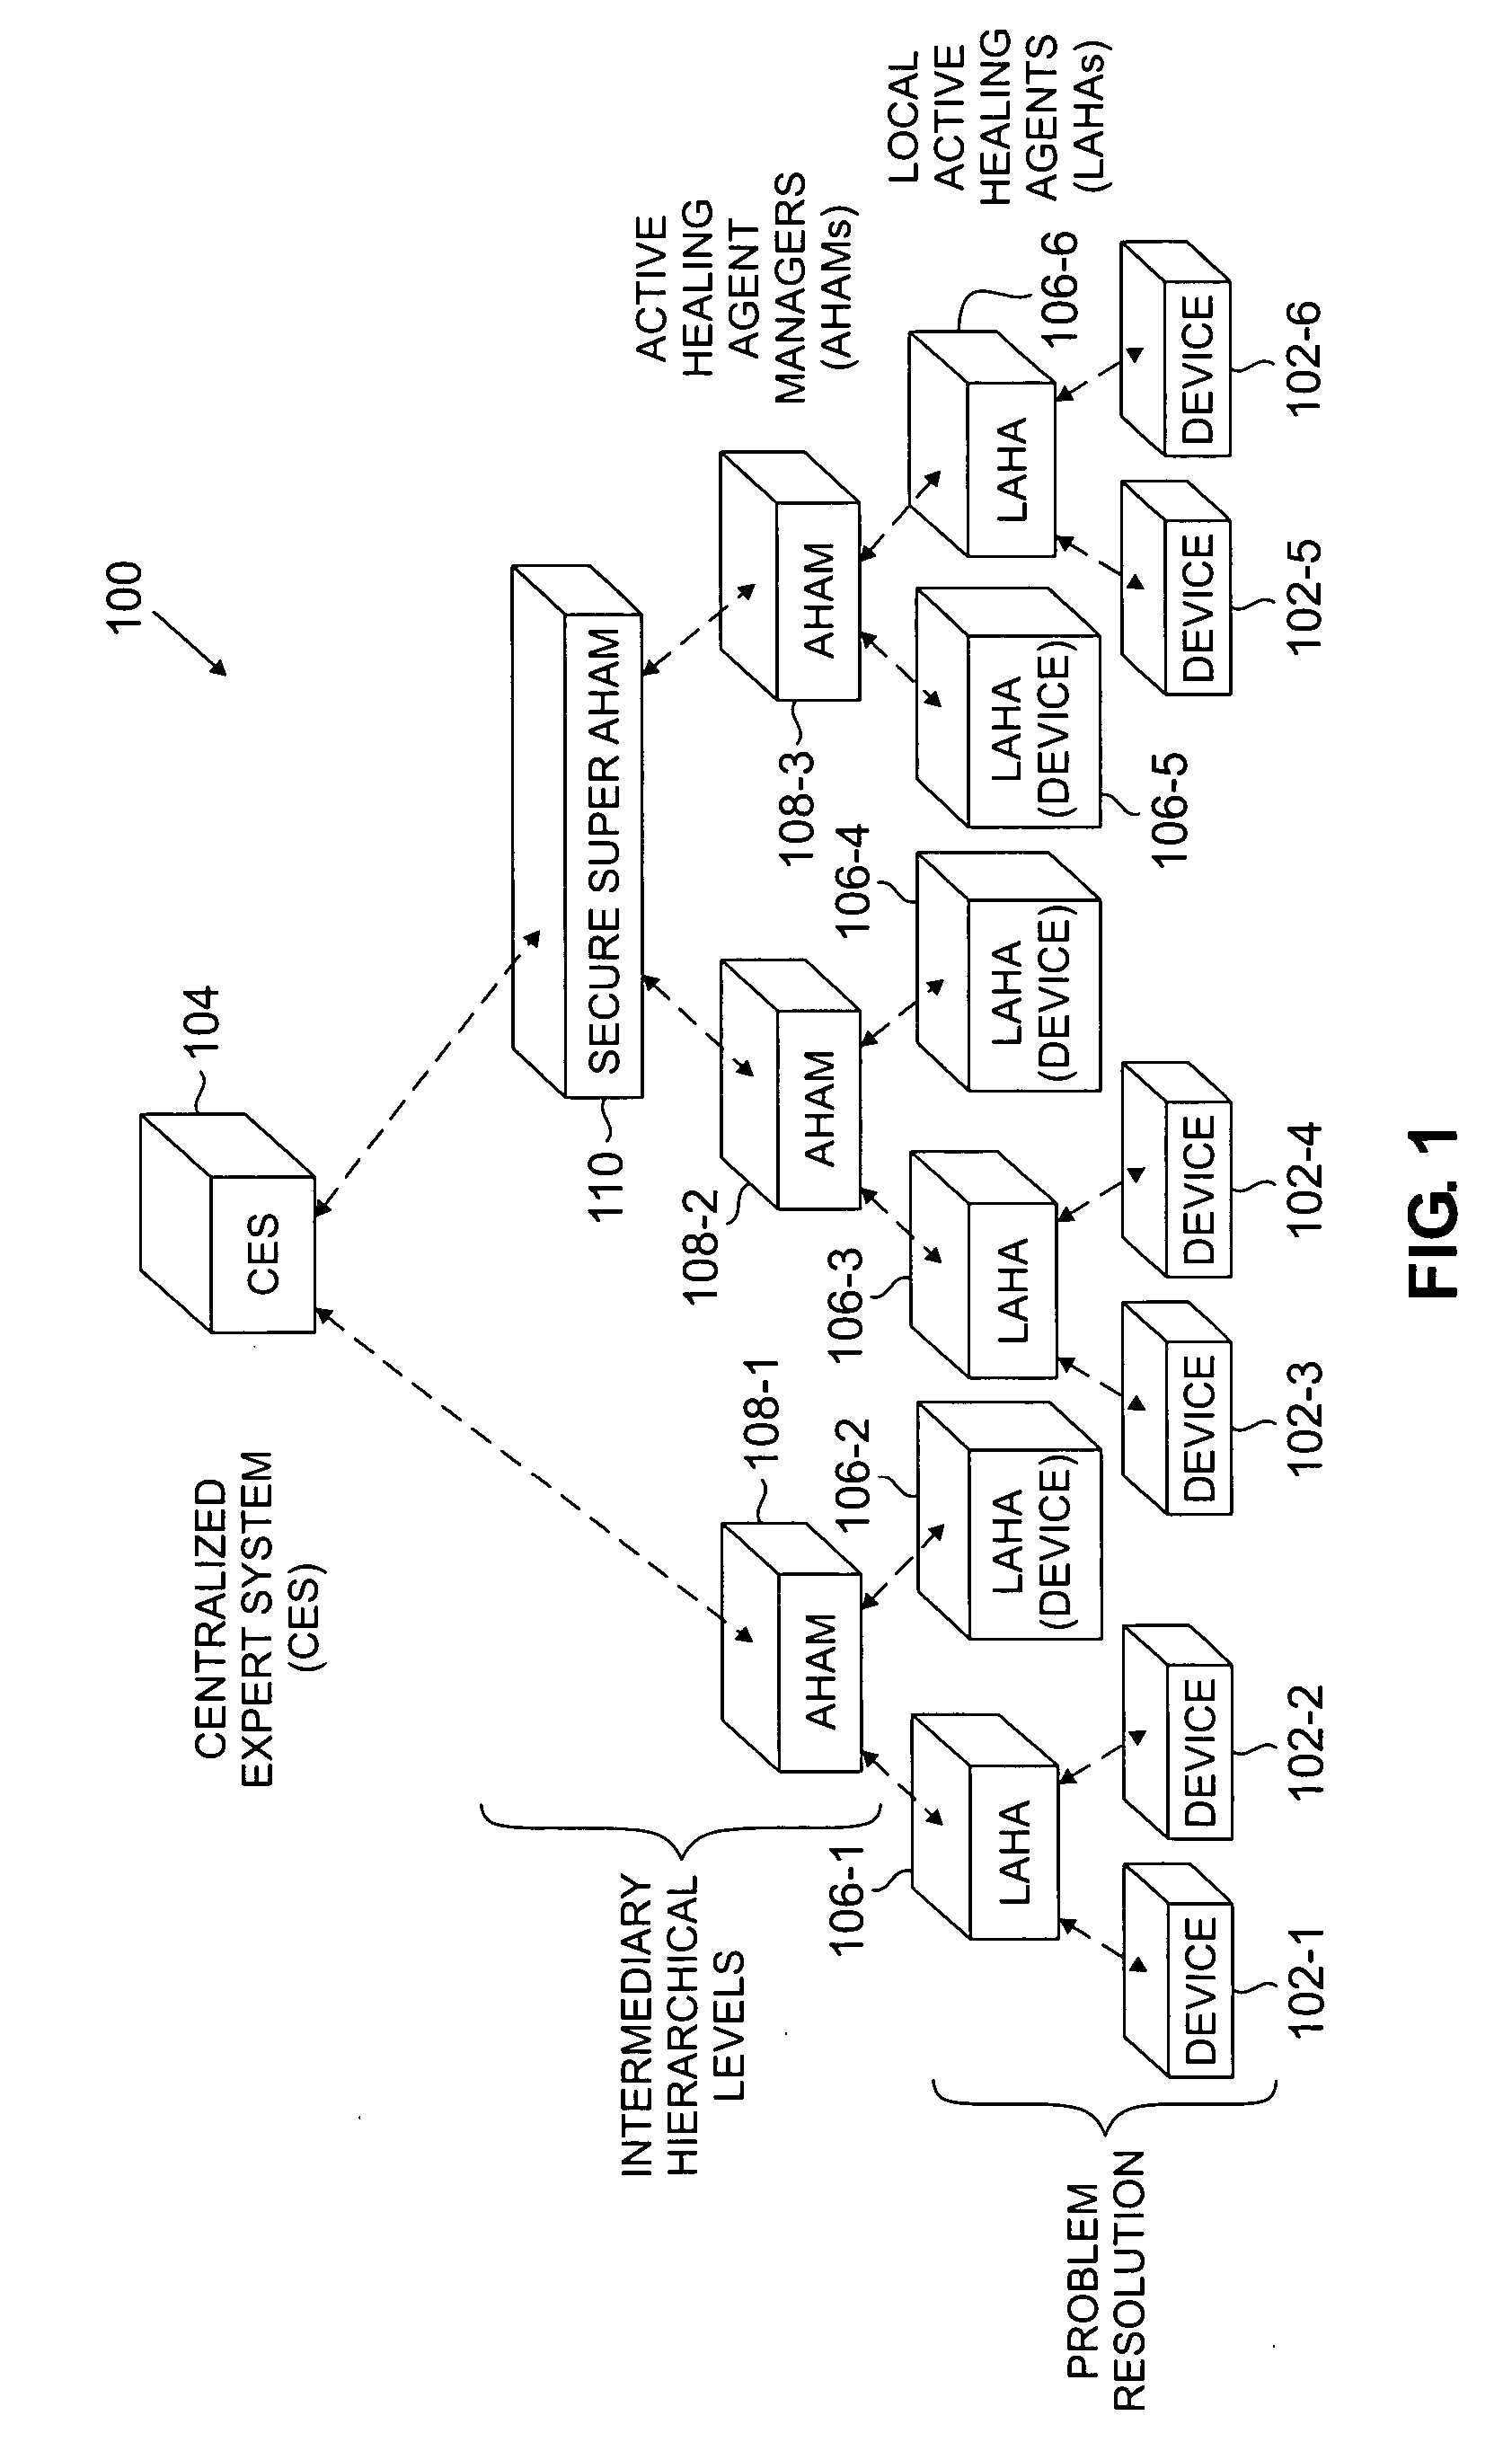 Distributed expert system for automated problem resolution in a communication system